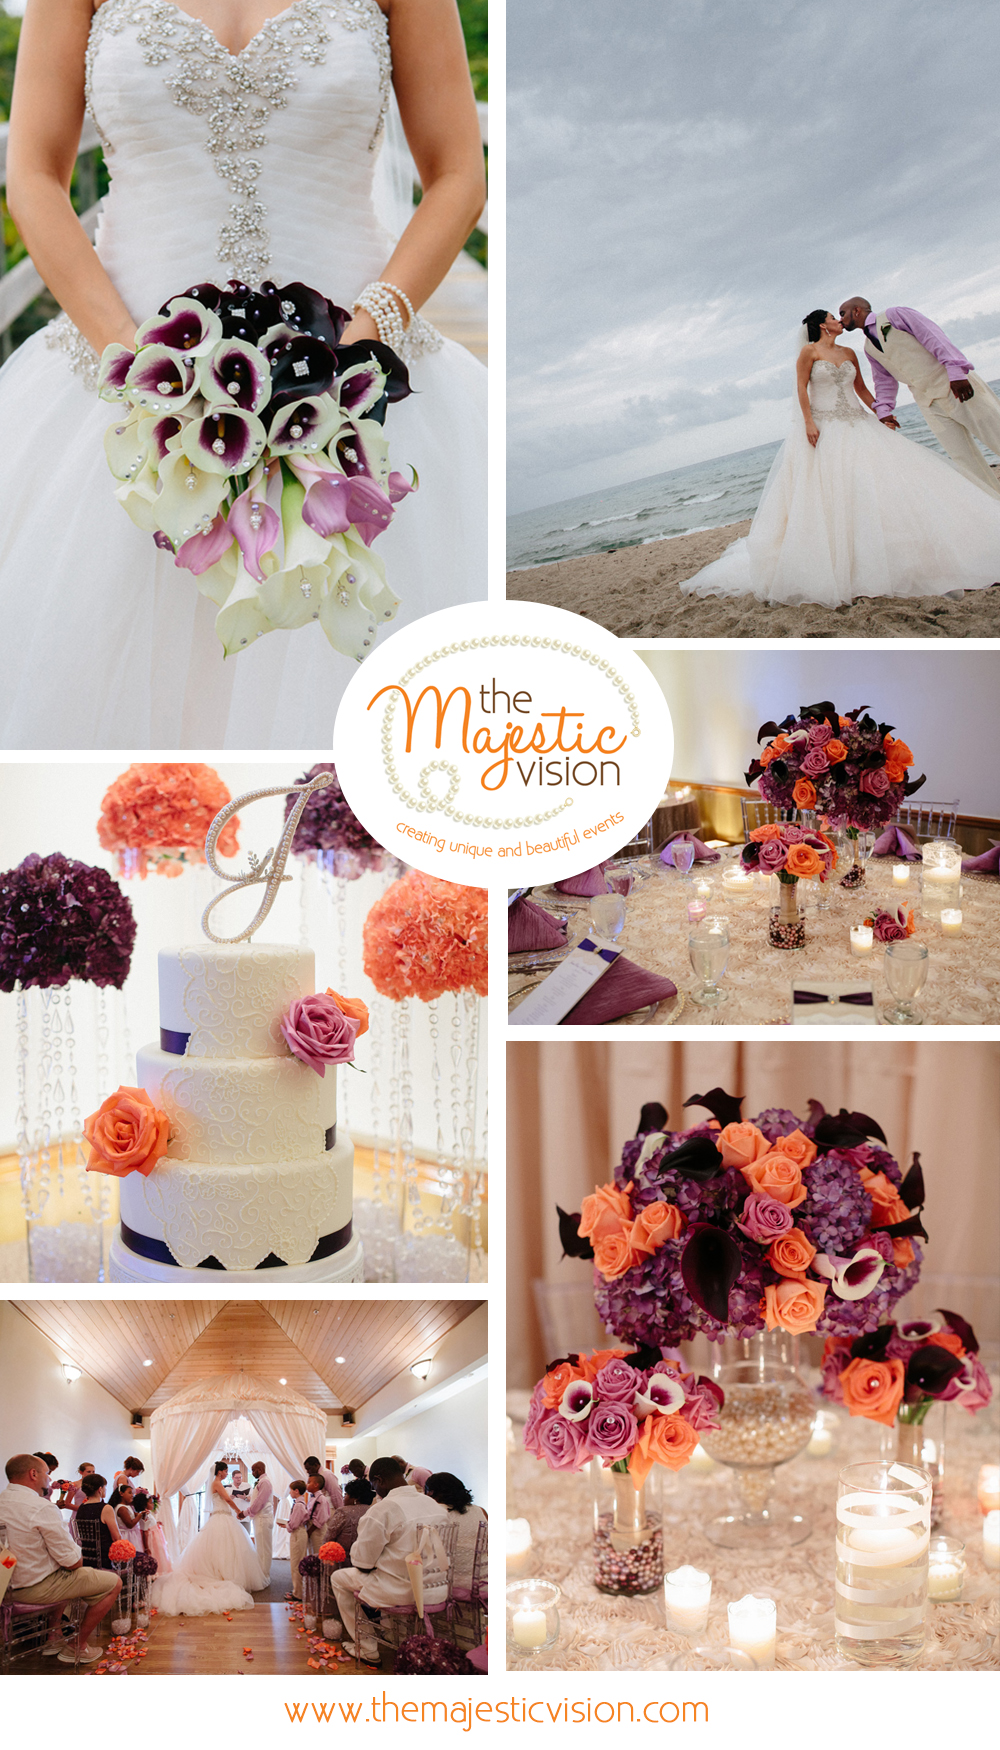 Elegant Purple and Coral Waterfront Wedding | The Majestic Vision Wedding Planning | Sailfish Marina in Palm Beach, FL | www.themajesticvision.com | Robert Madrid Photography